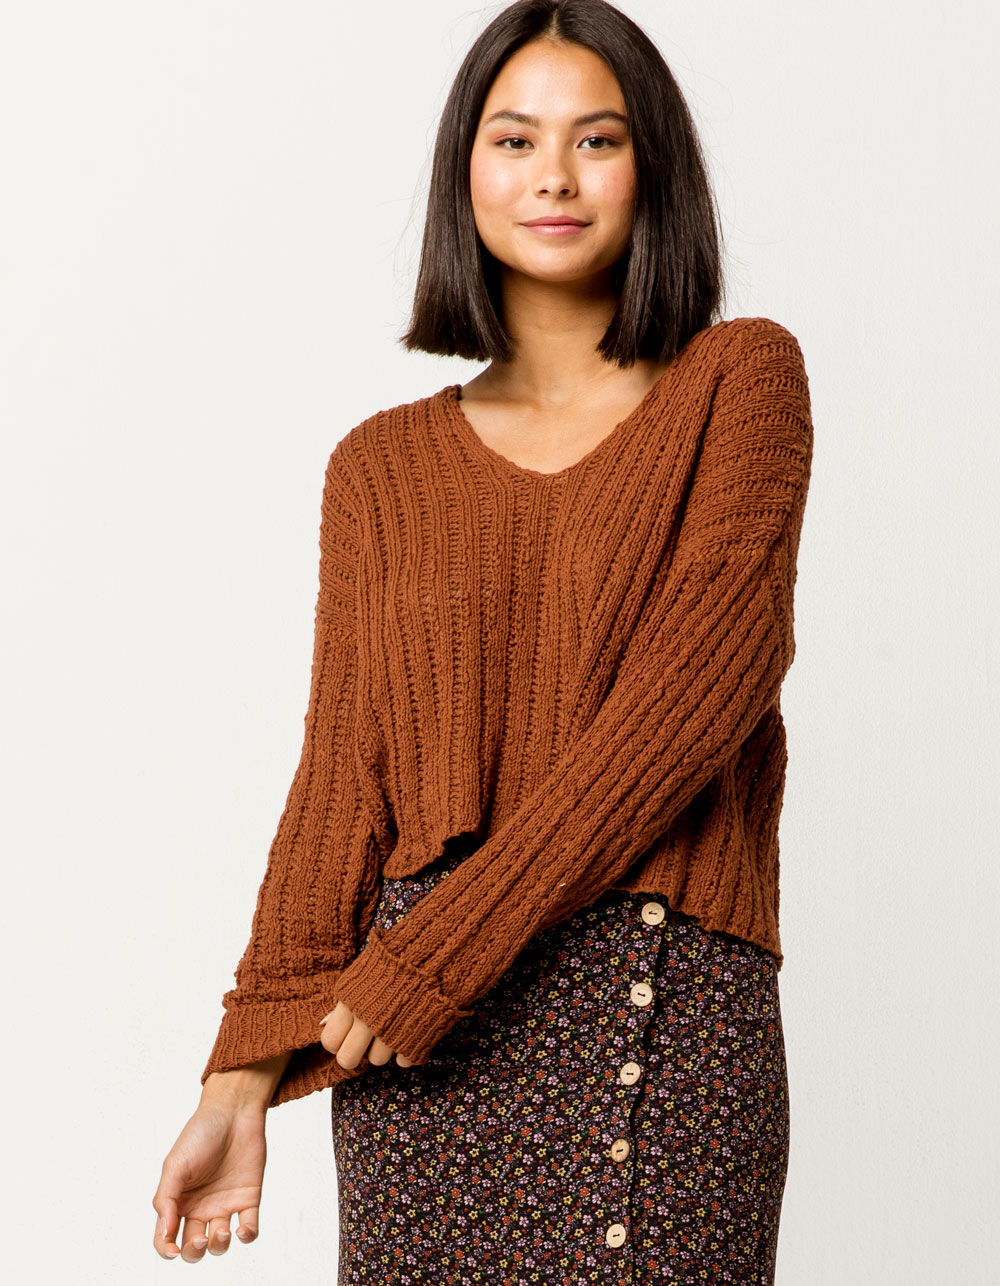 SKY AND SPARROW Open Weave Brown Womens Crop Sweater - BROWN | Tillys